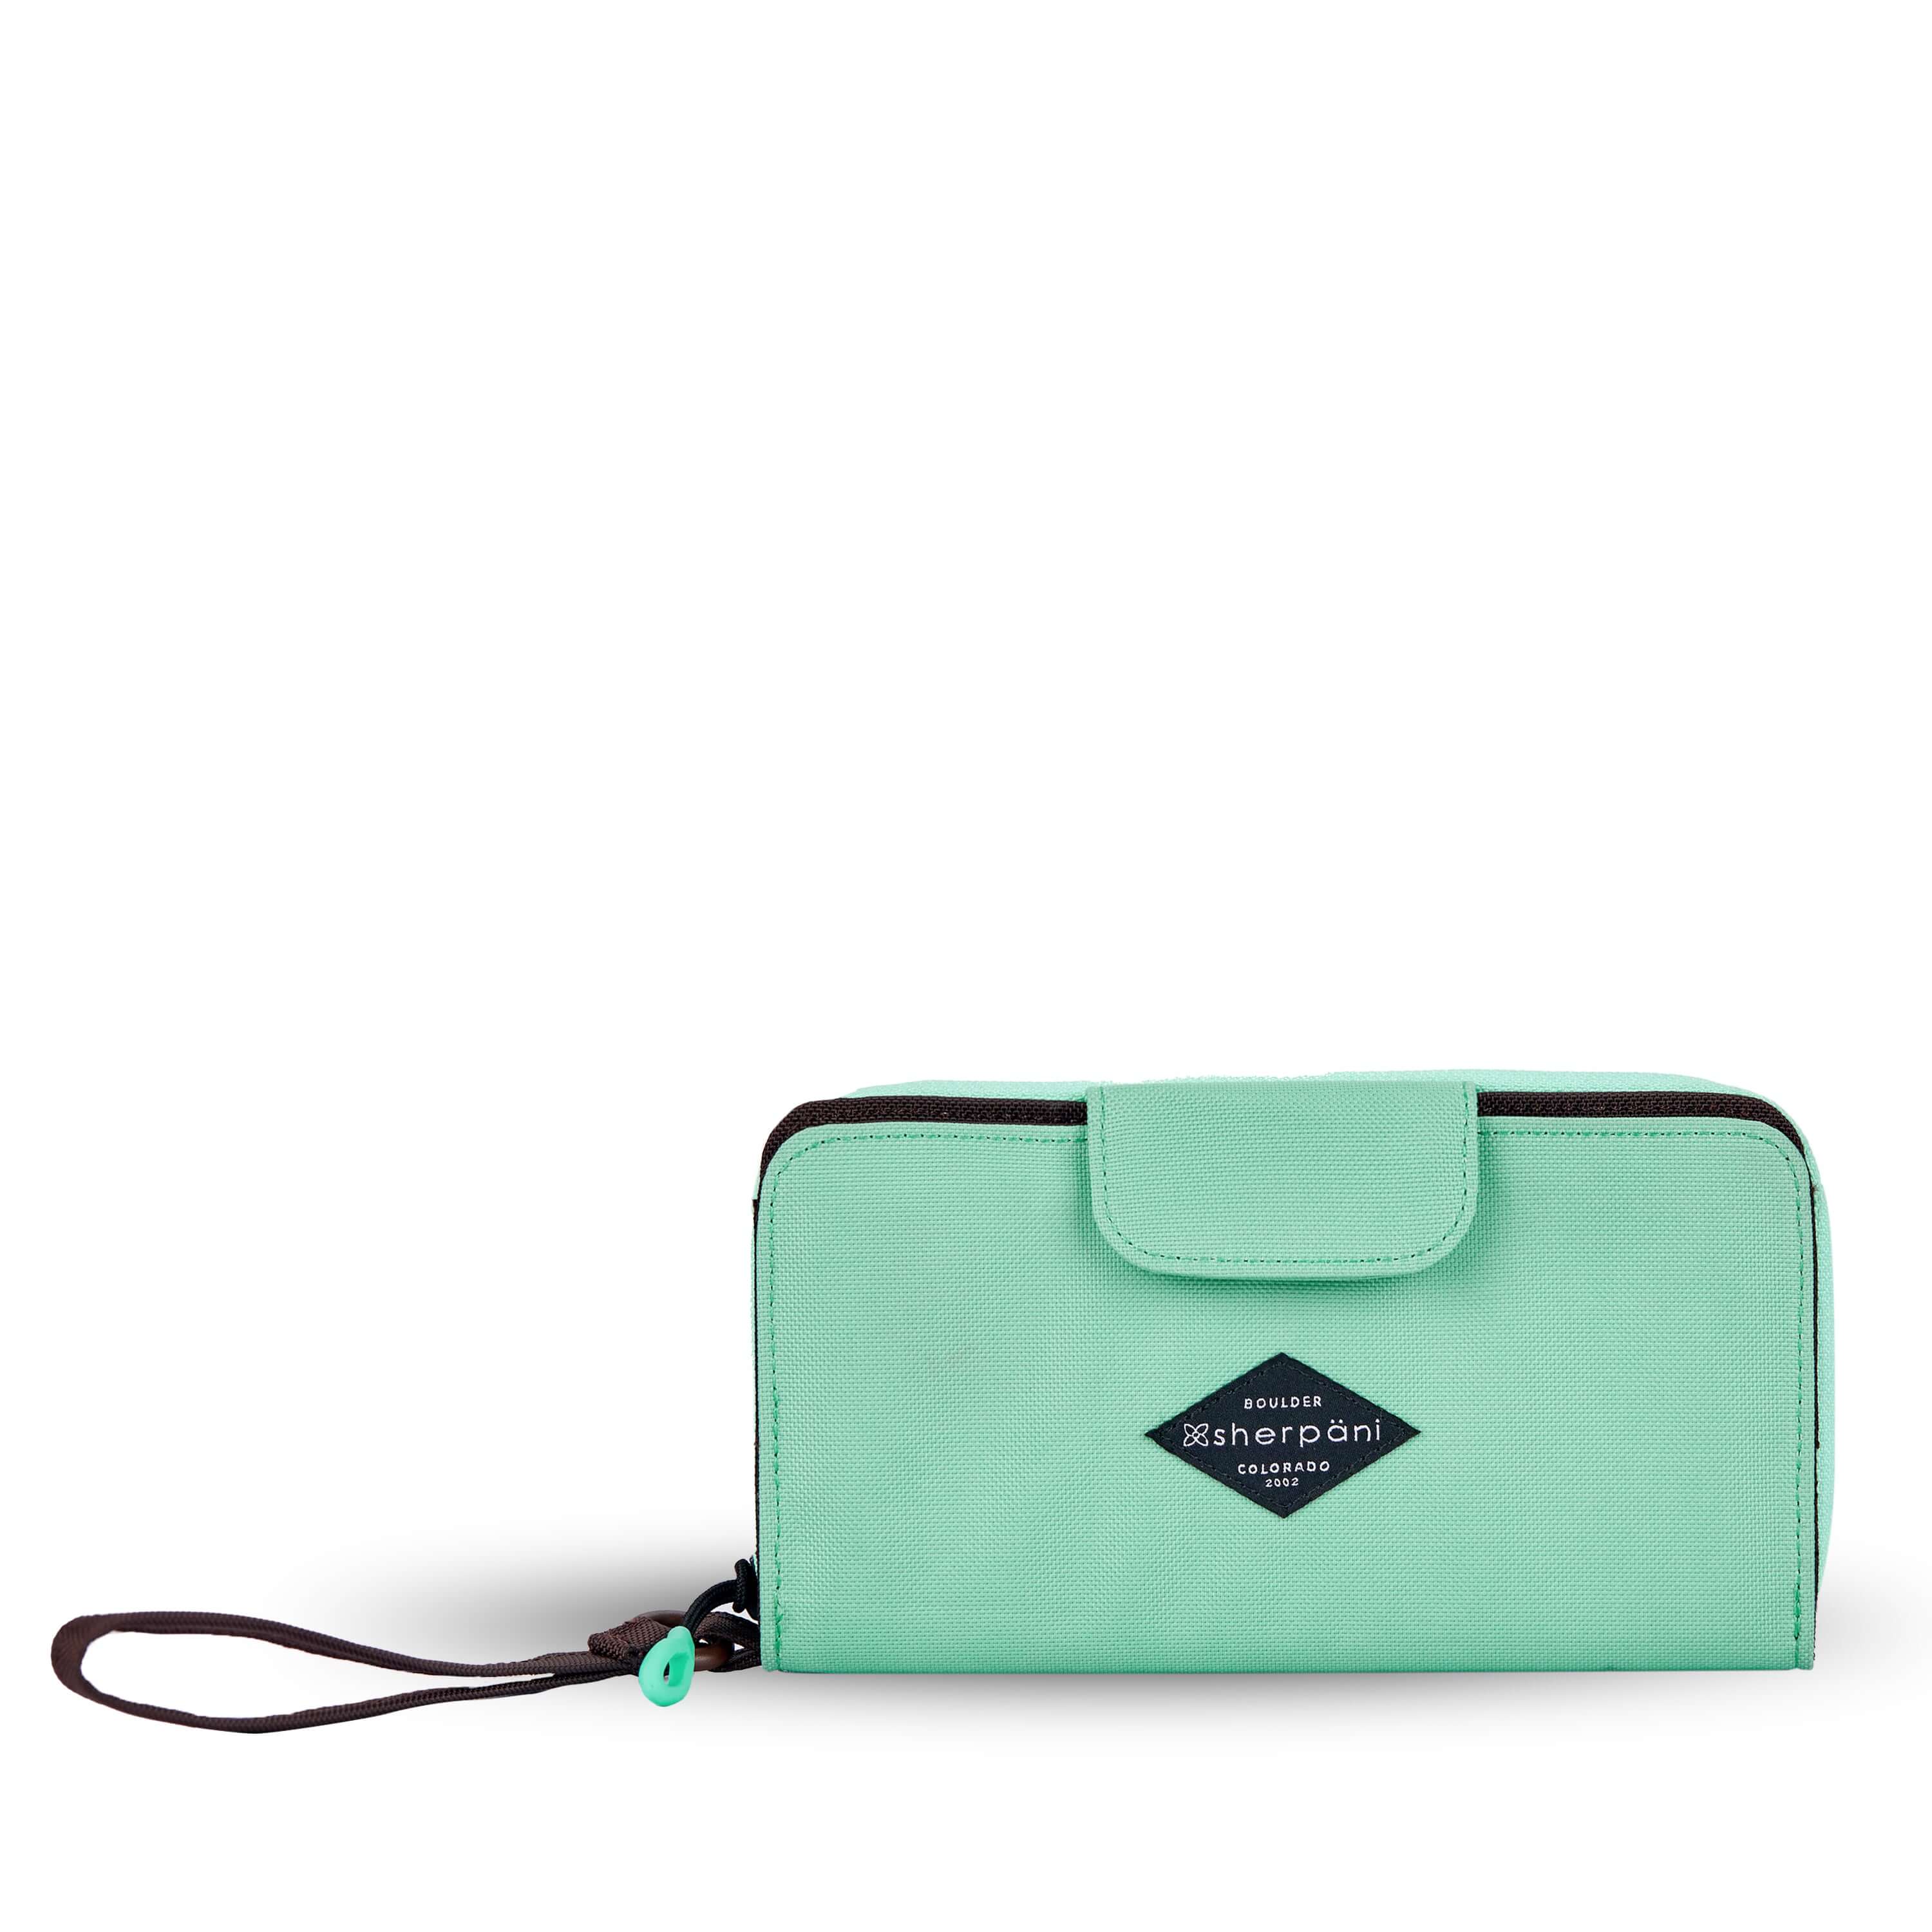 Flat front view of Sherpani wallet, the Tulum in Seagreen. The wallet is light green in color. There is a fabric flap with snap feature that folds over to open and close the wallet. There is a zipper compartment in the back with an easy-pull zipper accented in light green. The wallet features a wristlet strap in brown.